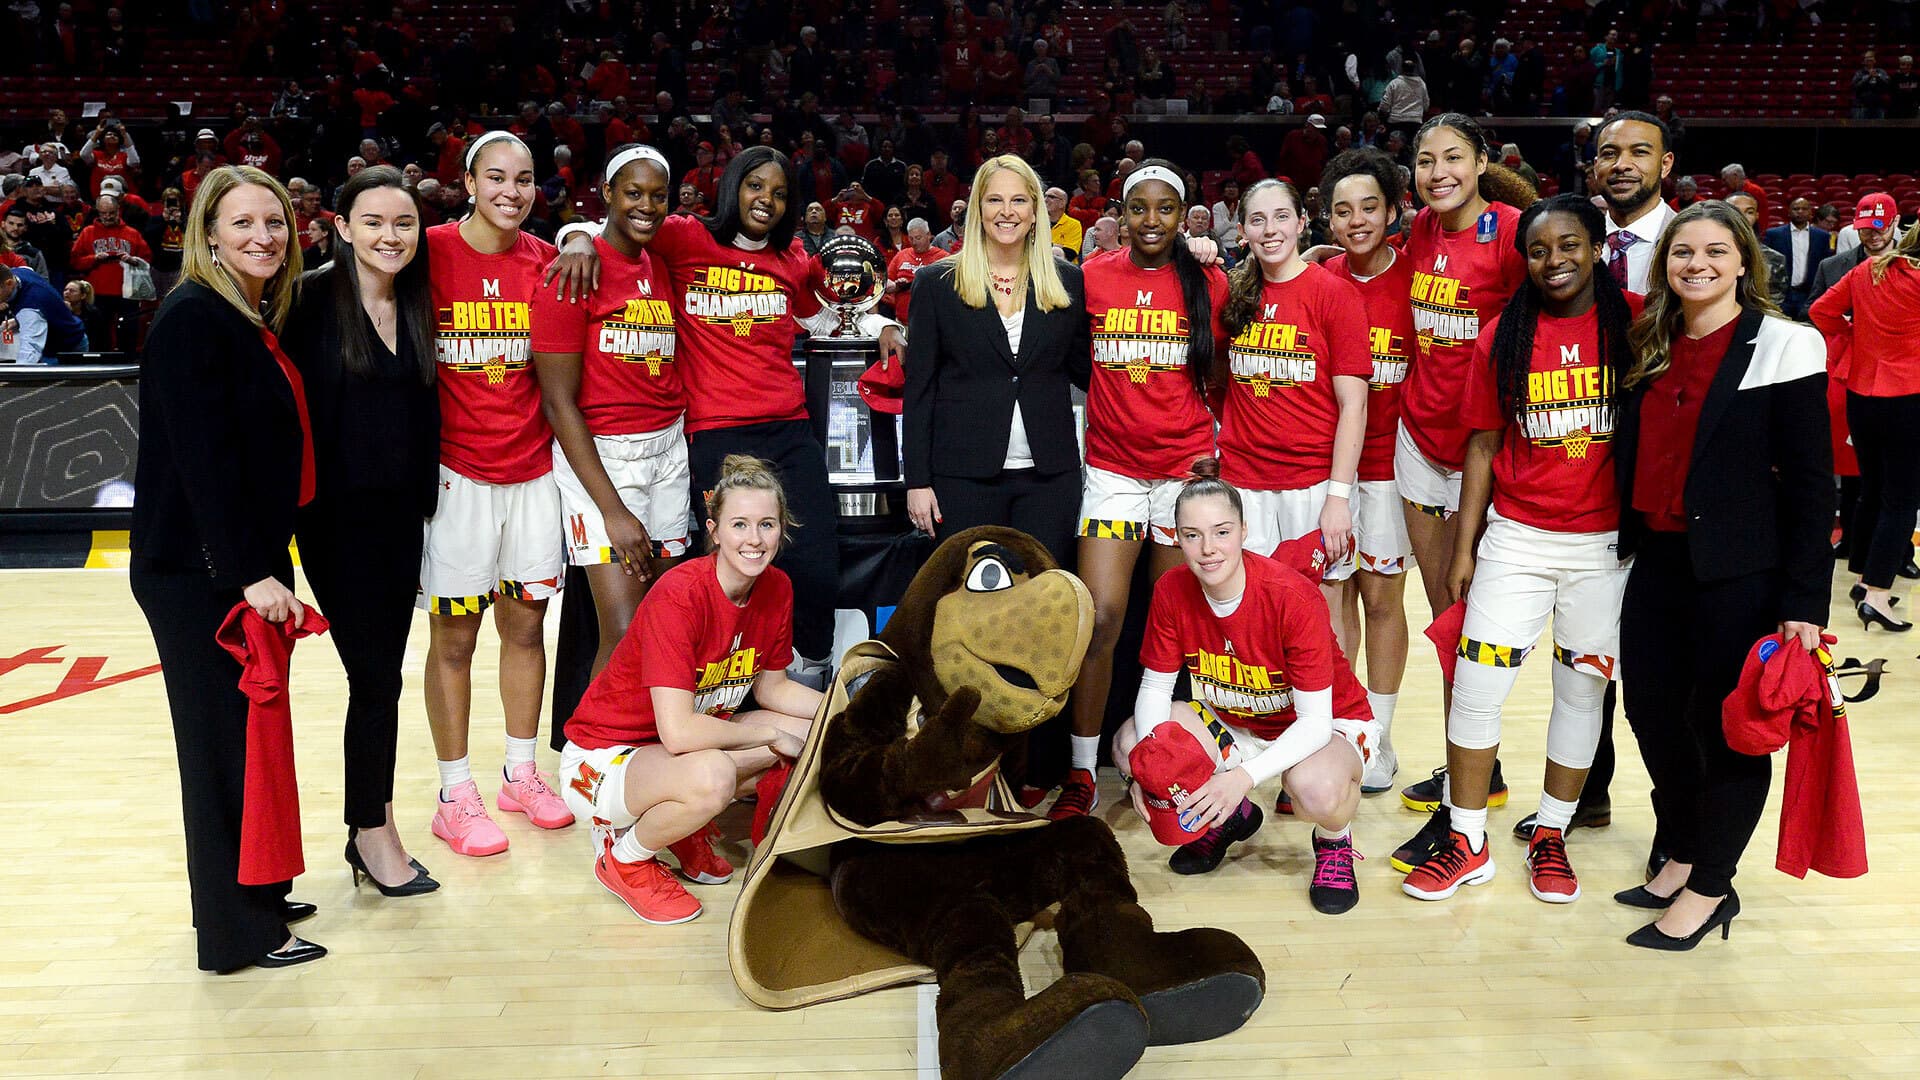 Women's basketball team with trophy